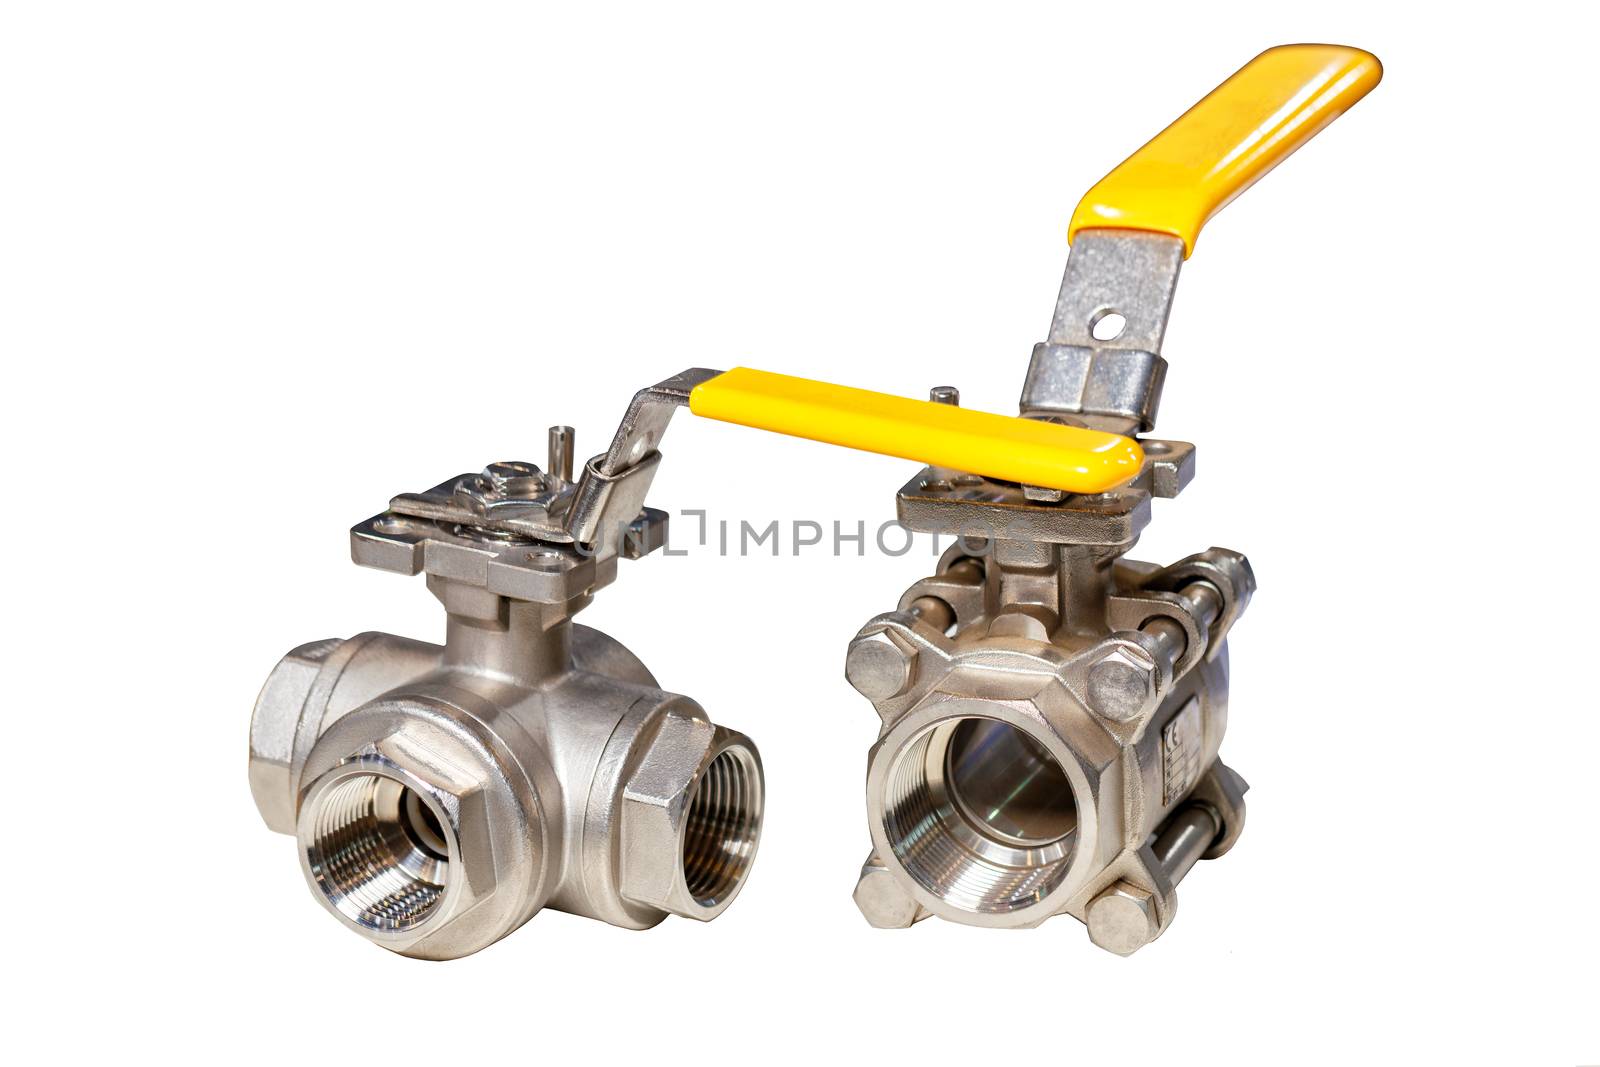 Water valve set, metal shut-off valves and tees for plumbing pipe connections, isolated on white background.